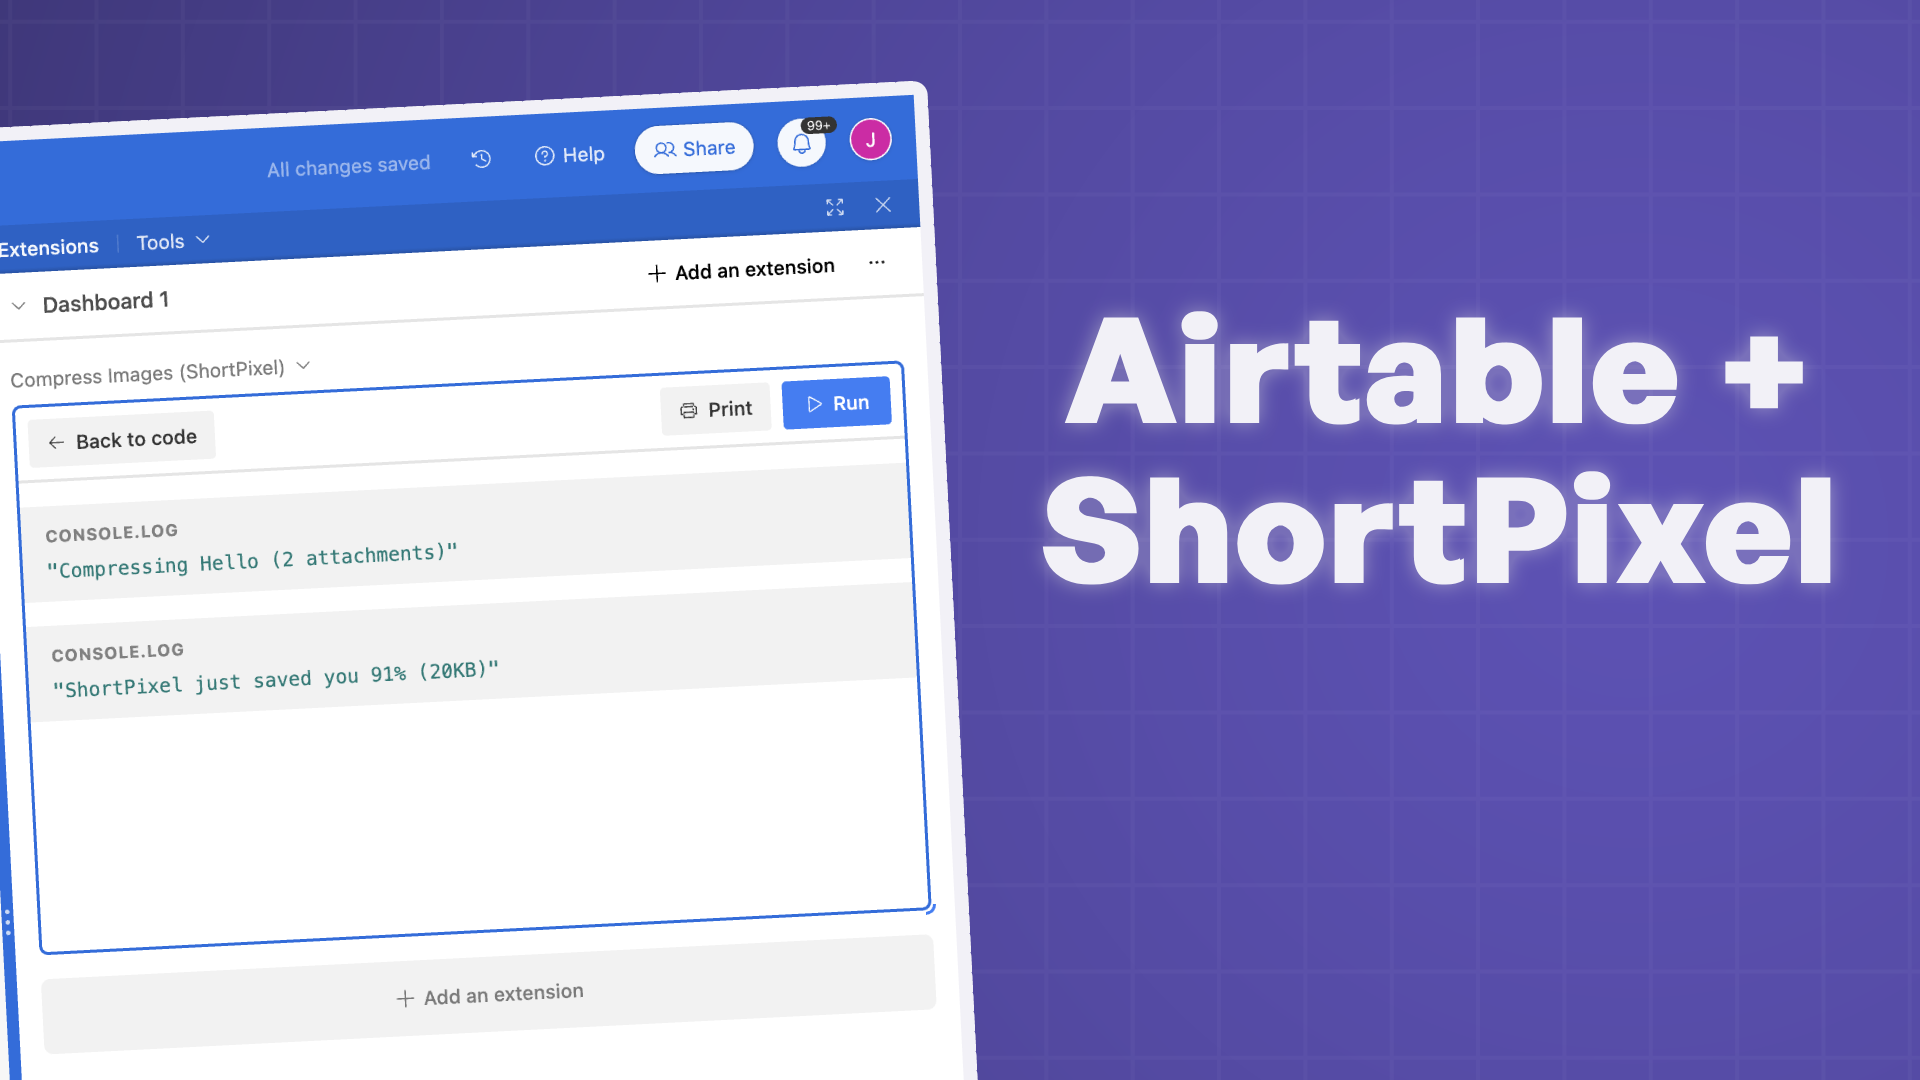 "Airtable ShortPixel" with screenshot of images in Airtable getting compressed with ShortPixel